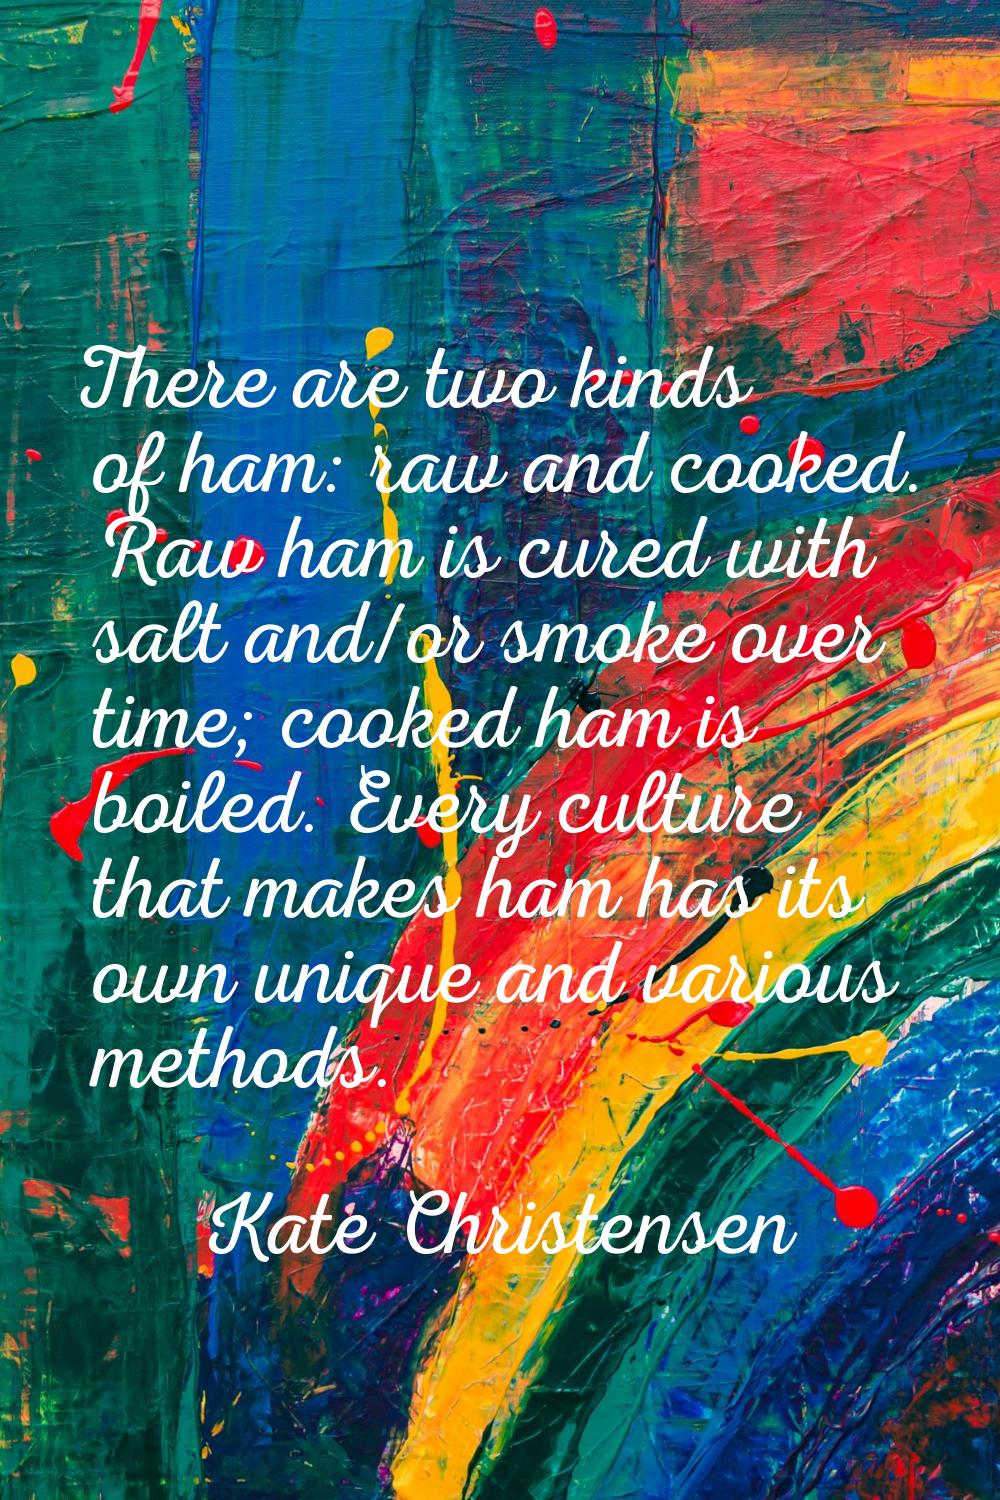 There are two kinds of ham: raw and cooked. Raw ham is cured with salt and/or smoke over time; cook